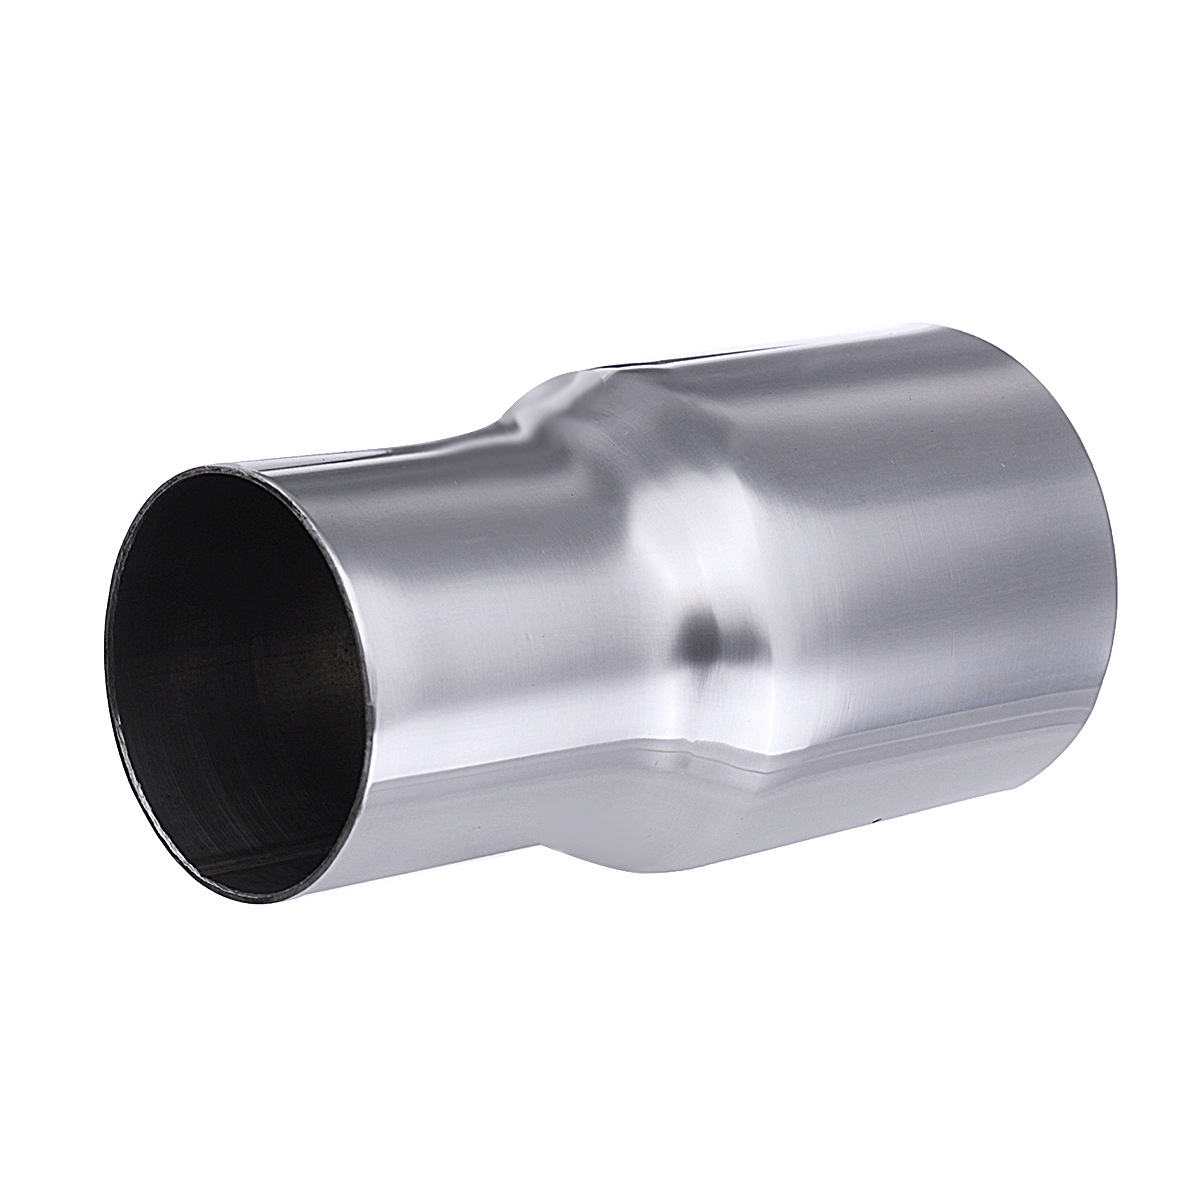 50mm-To-38mm-Universal-Exhaust-Reducer-Connector-Pipe-Adapter-Stainless-Steel-1752254-5